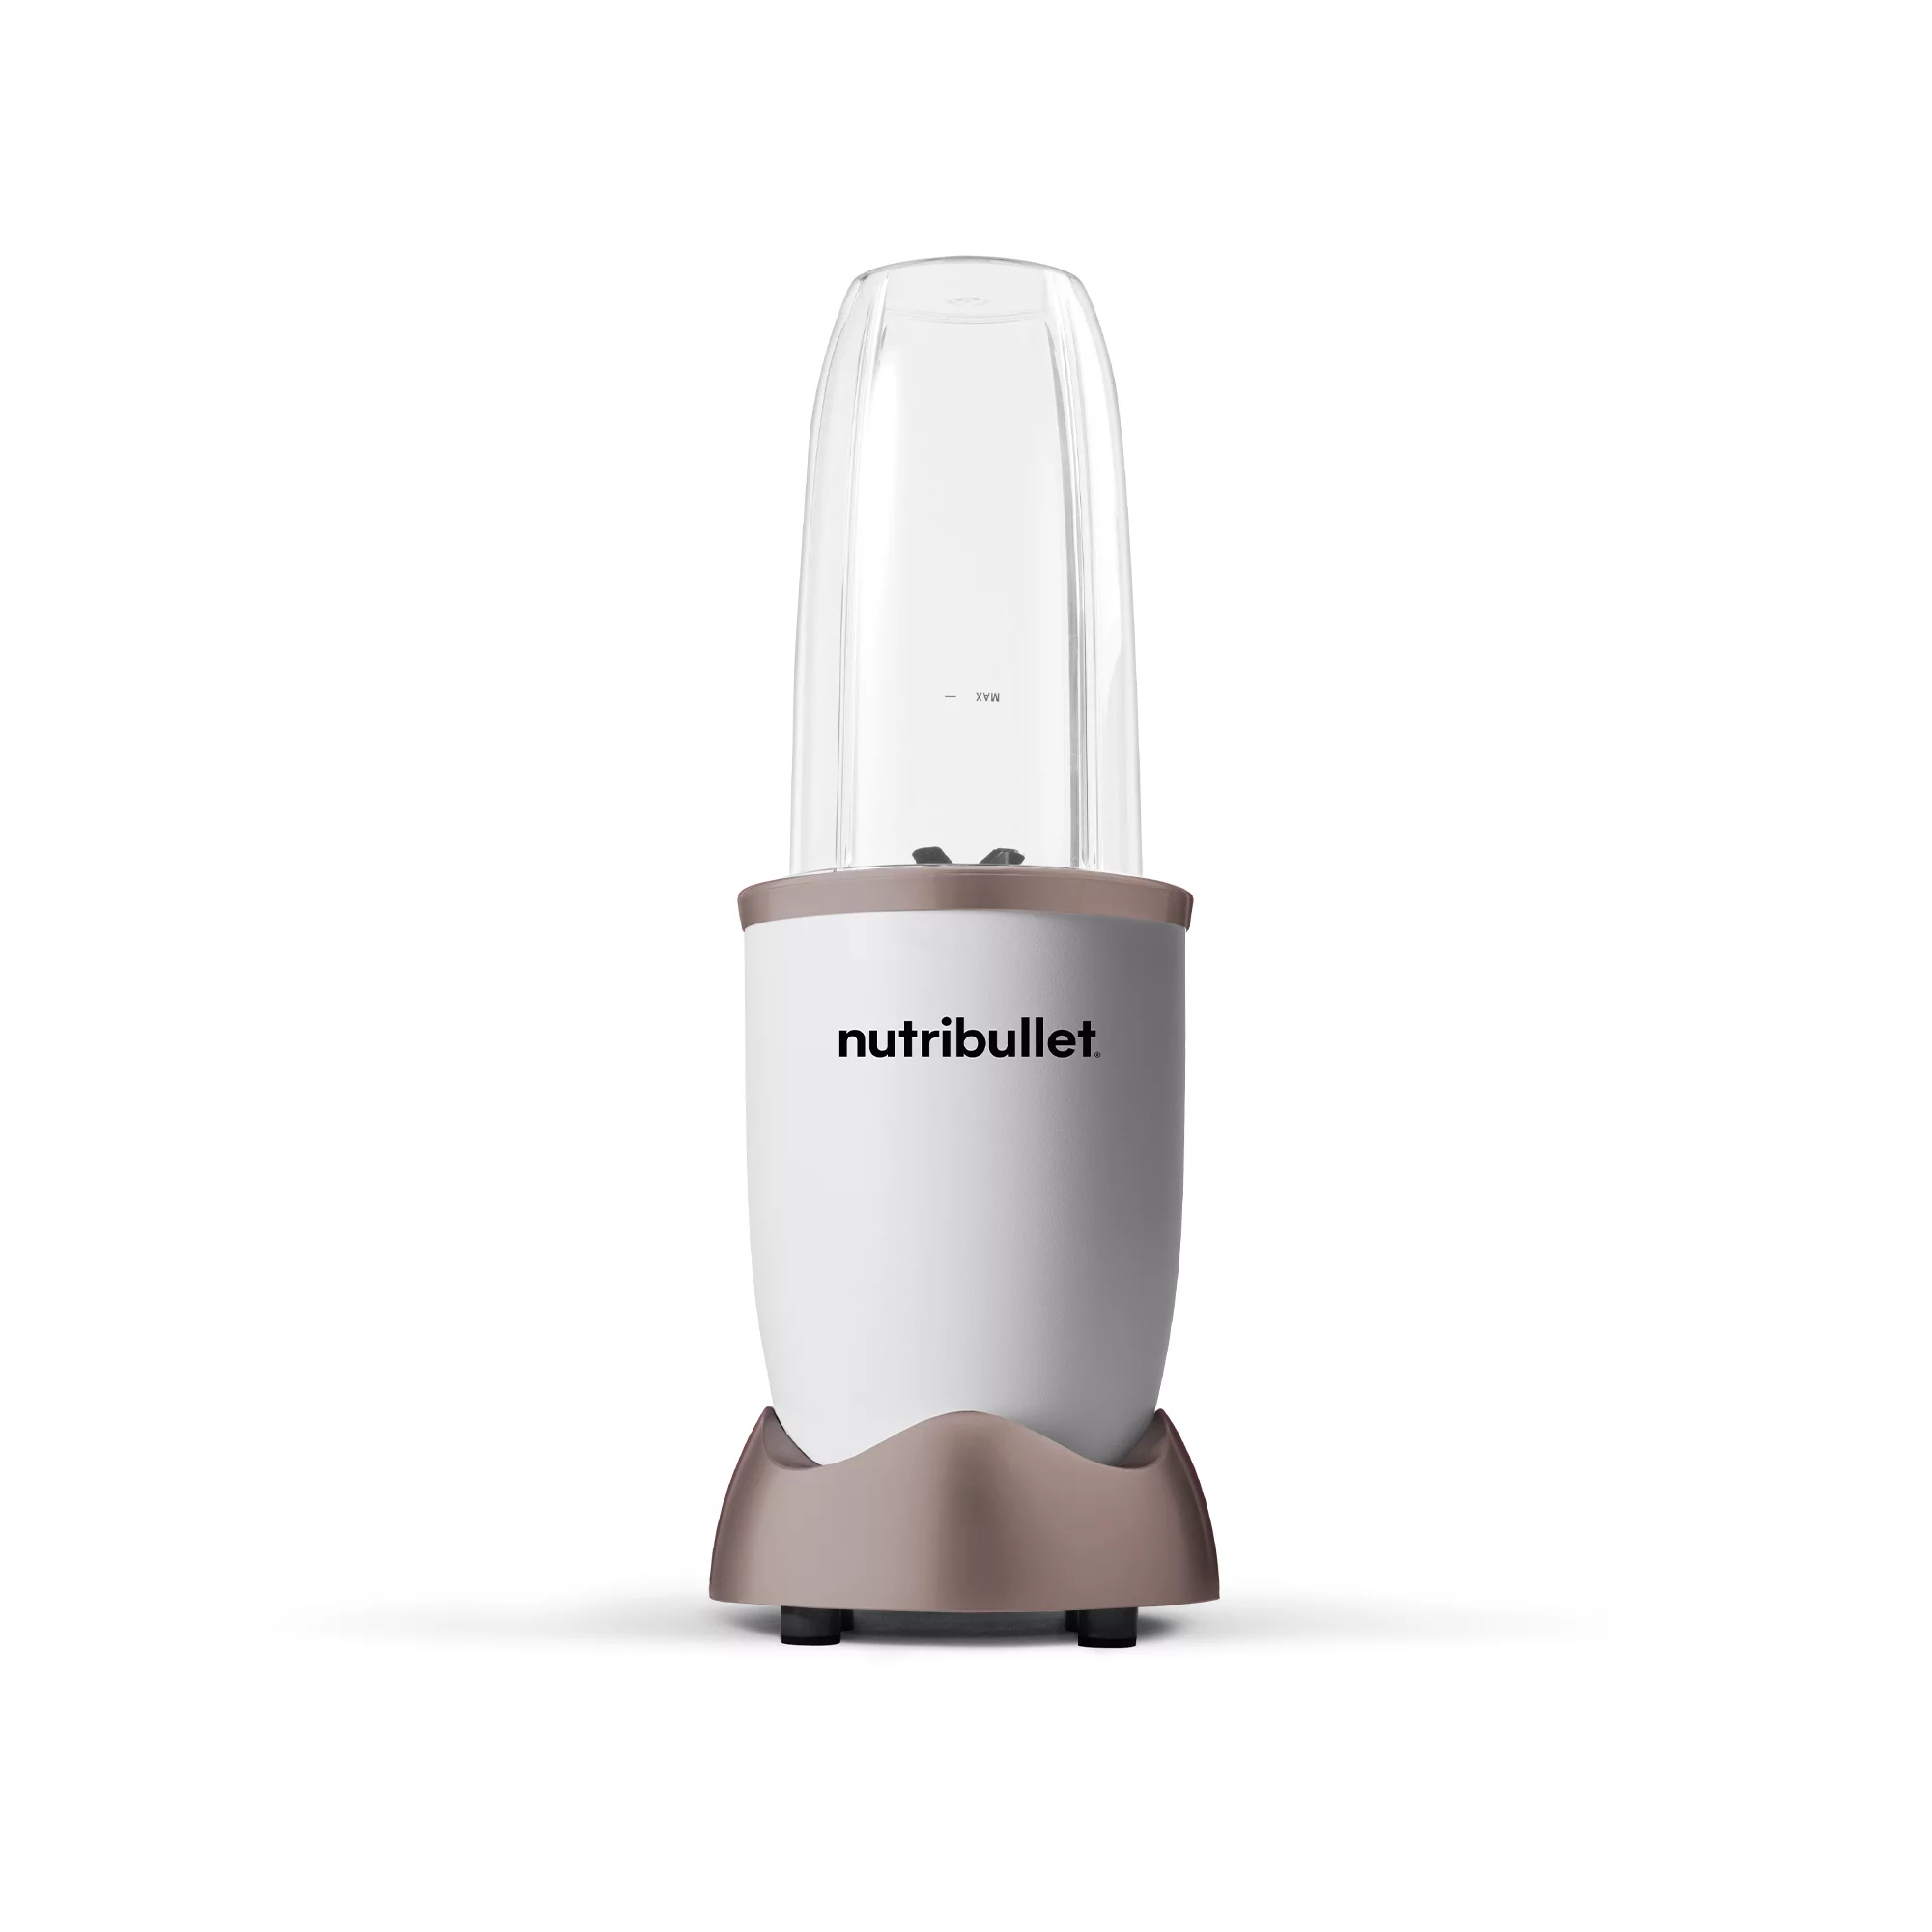 -YMMV- IN-STORE NutriBullet 500 Personal Blender with 3 Pieces, Matte White & Gold - Walmart.com $15.00